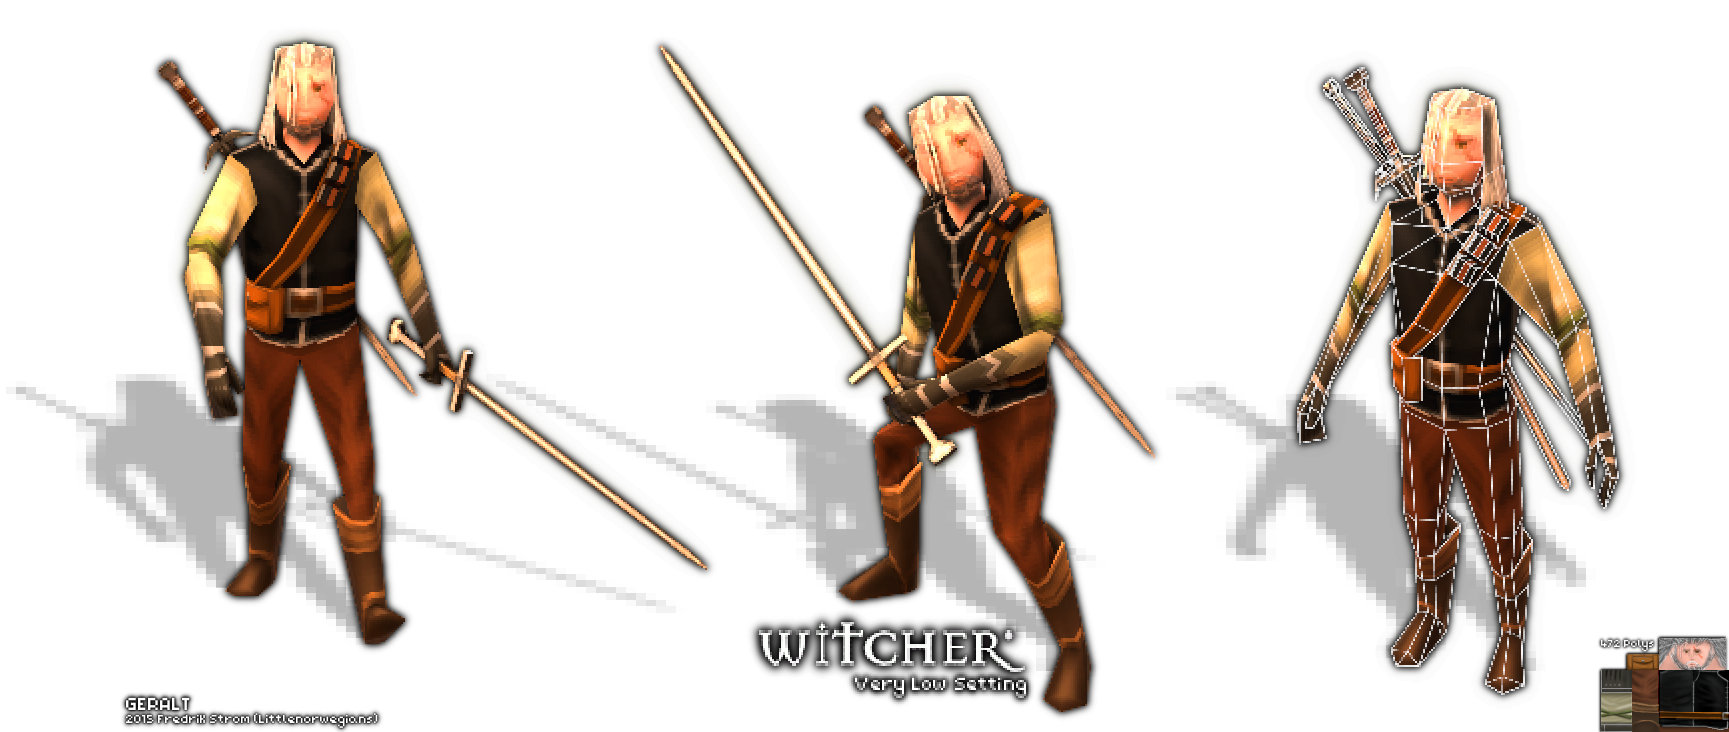 low_poly_geralt__the_witcher__by_littlenorwegians-d8yqitu.png